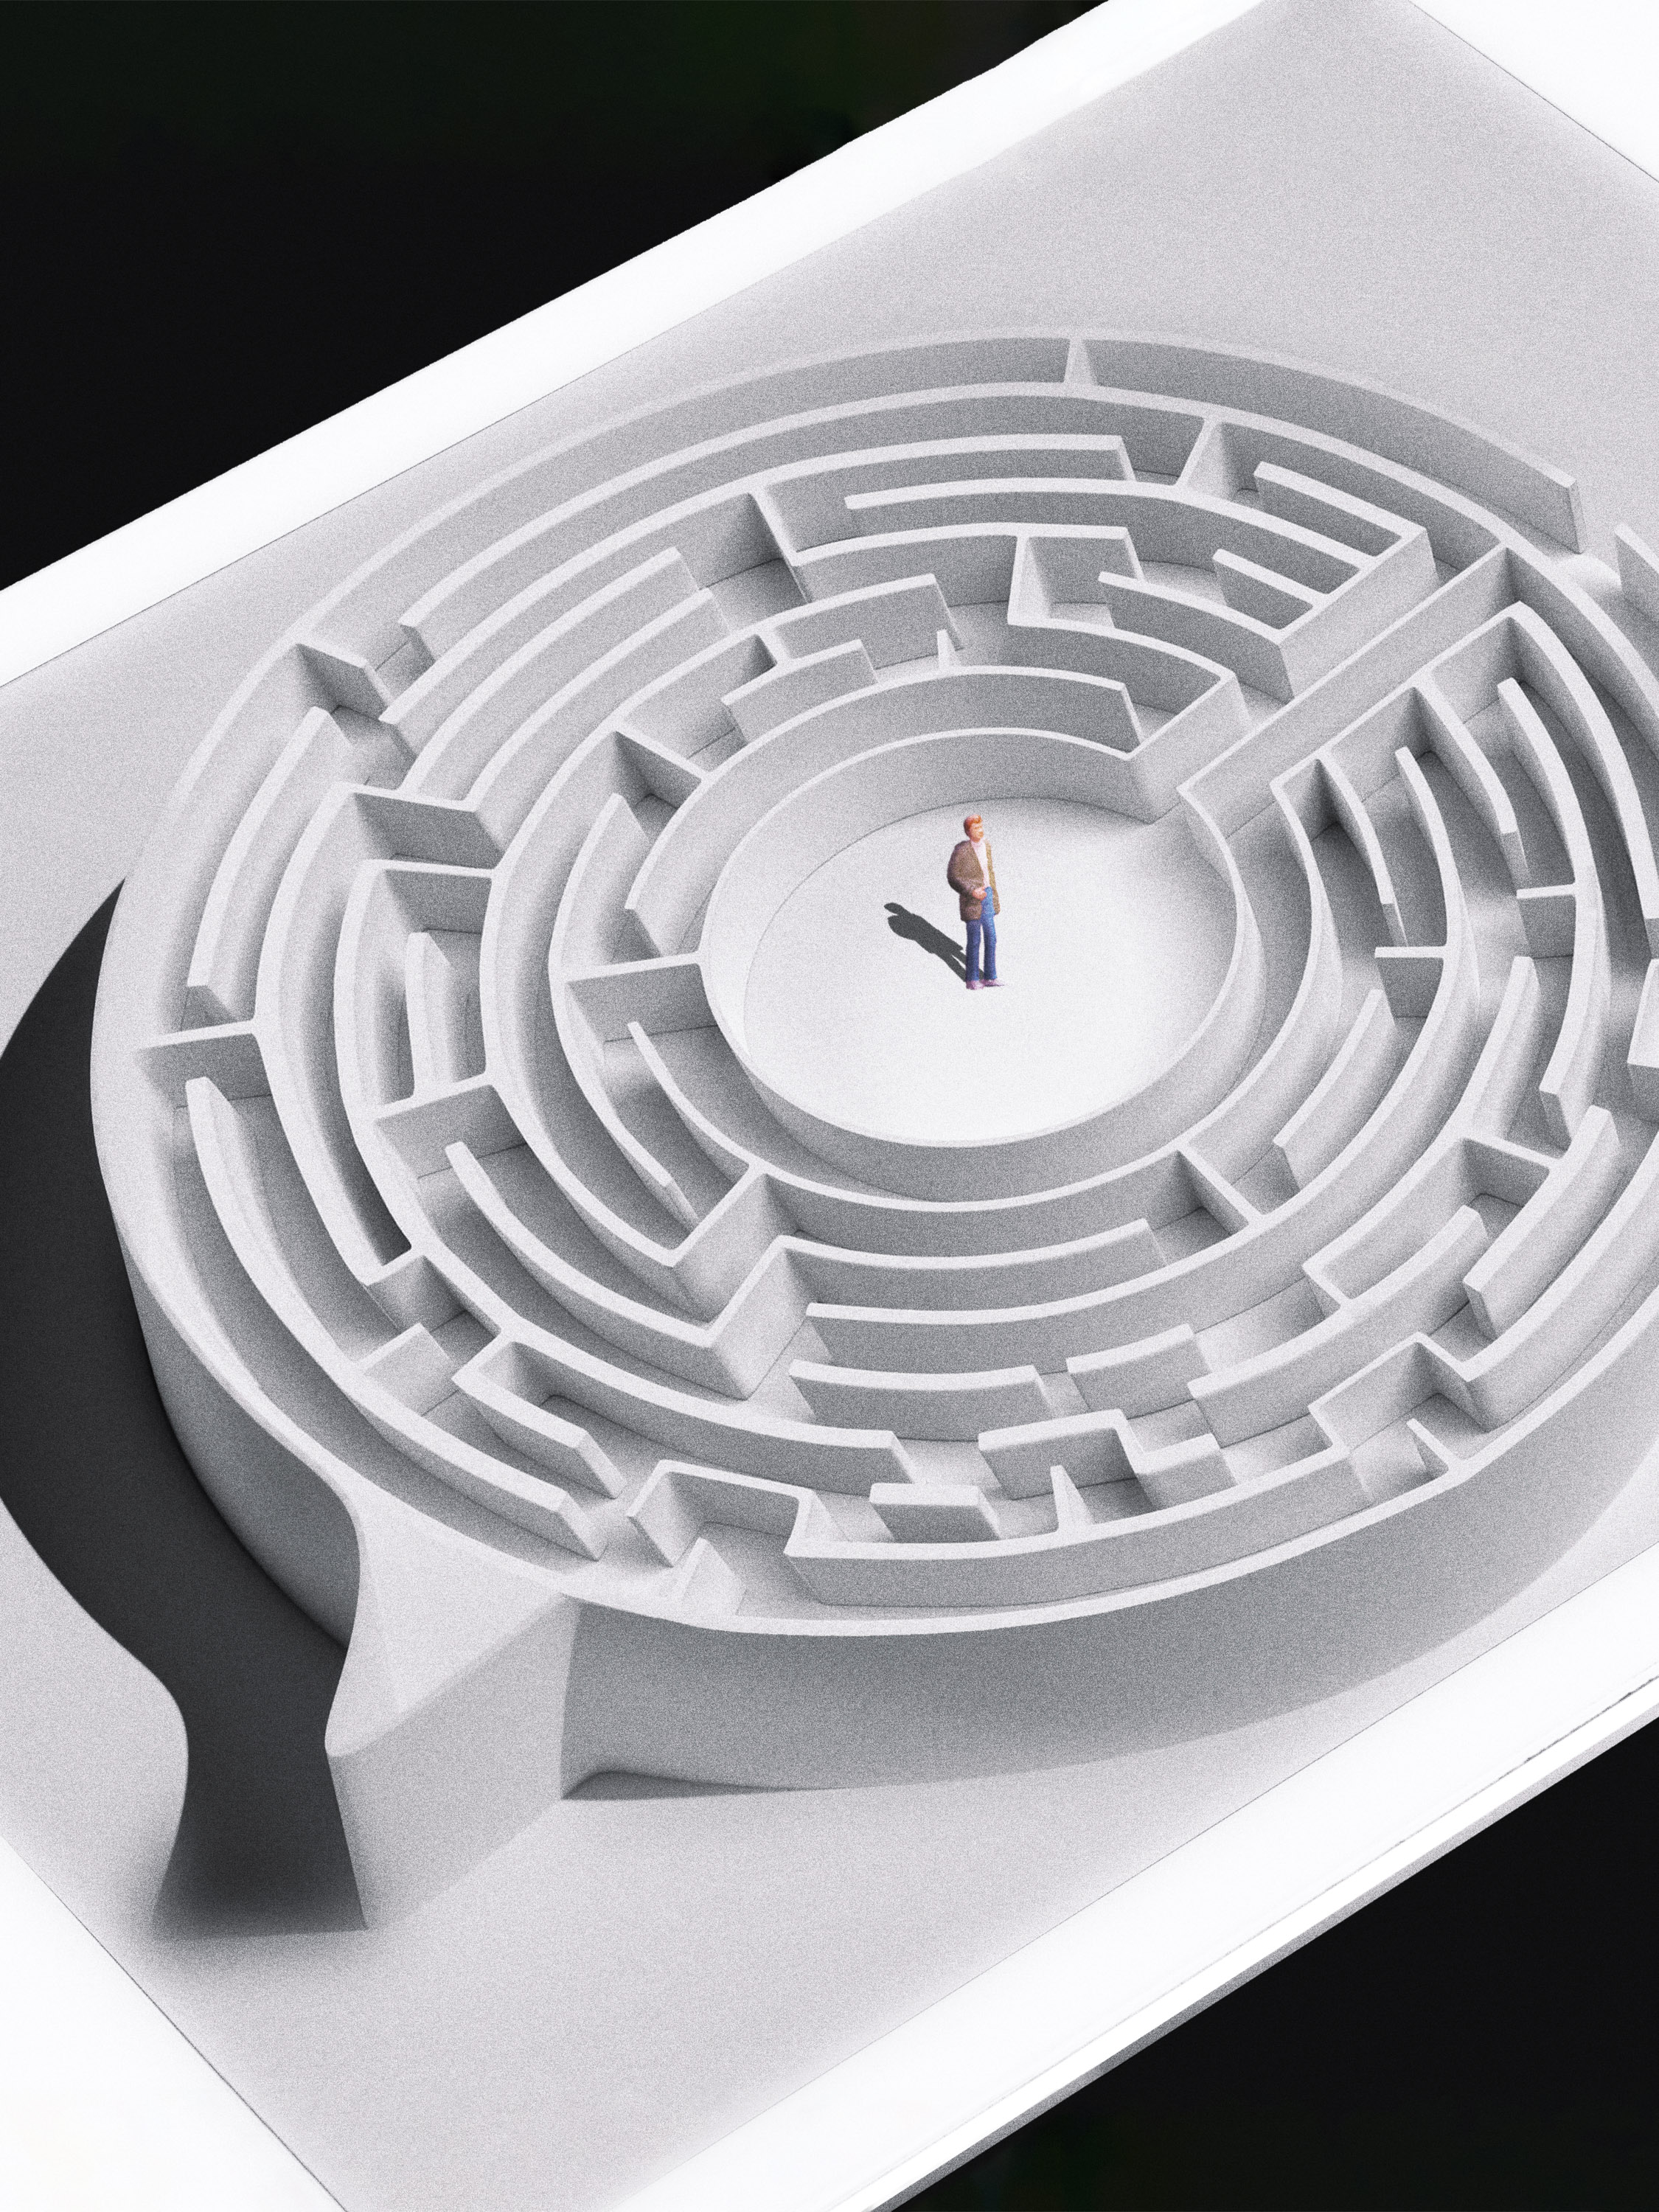 a tiny person in the center of a maze protruding from the screen of an iPad